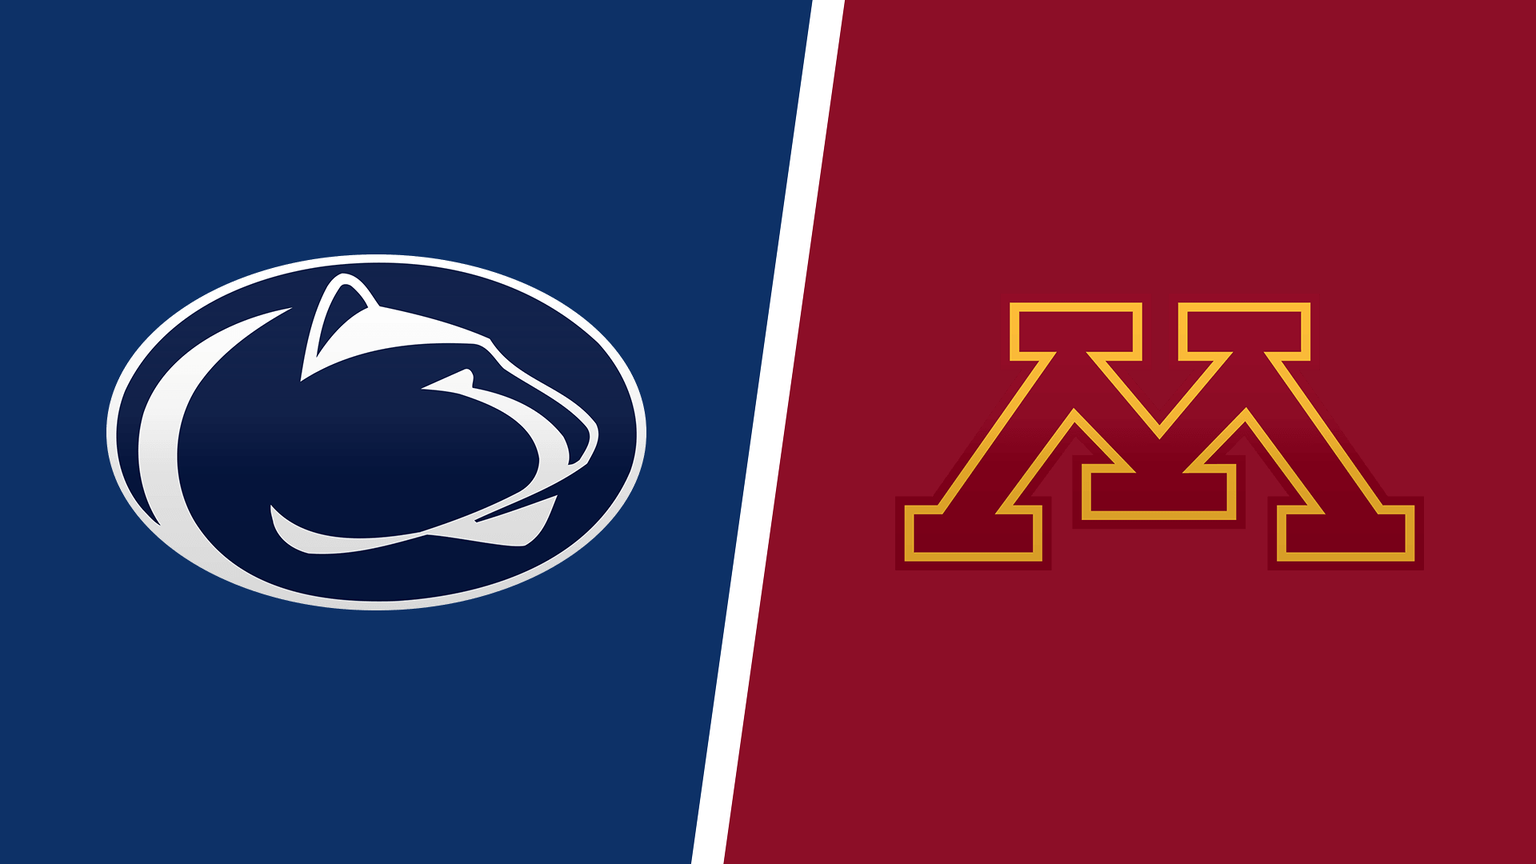 How to Watch Minnesota vs. Penn State Live Online on October 22, 2022